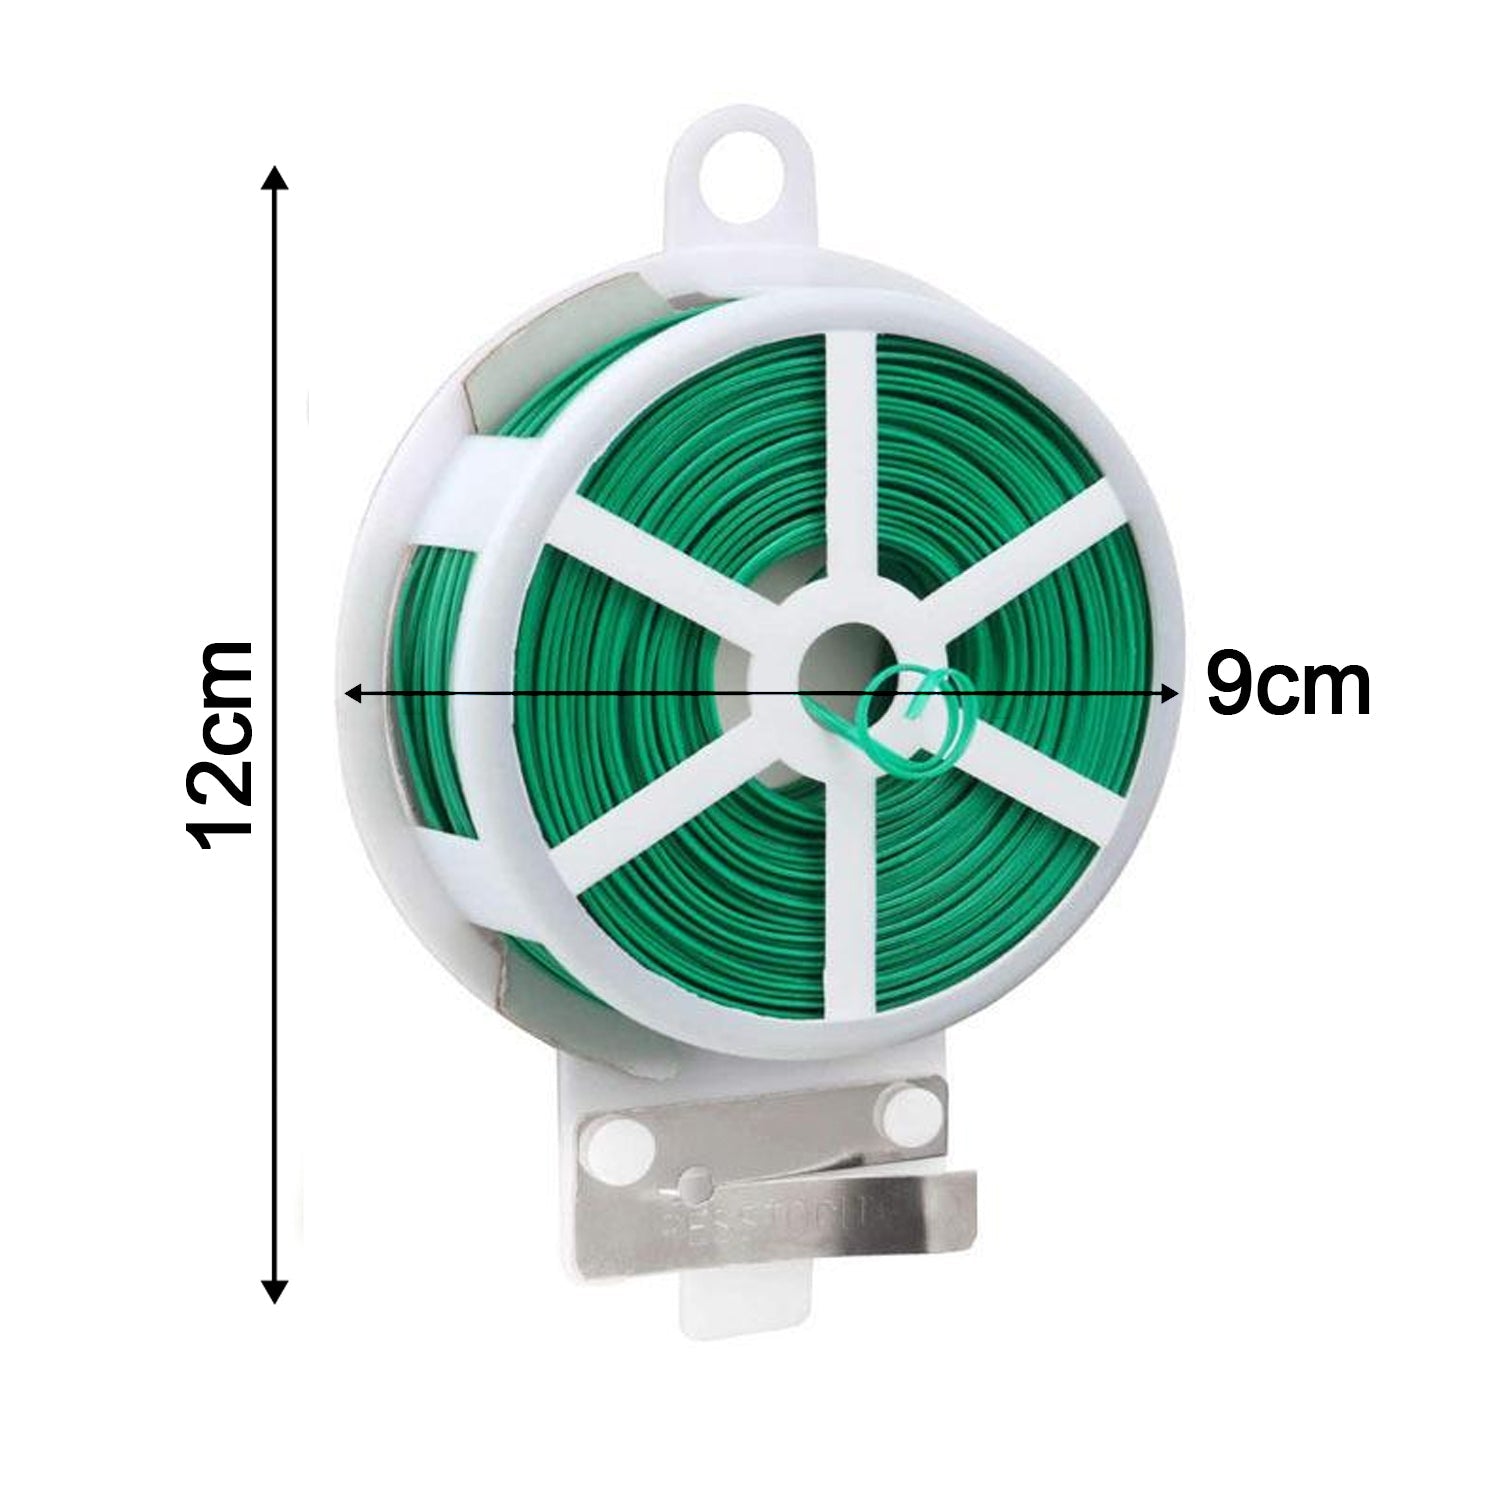 873 Plastic Twist Tie Wire Spool With Cutter For Garden Yard Plant 50m (Green) 